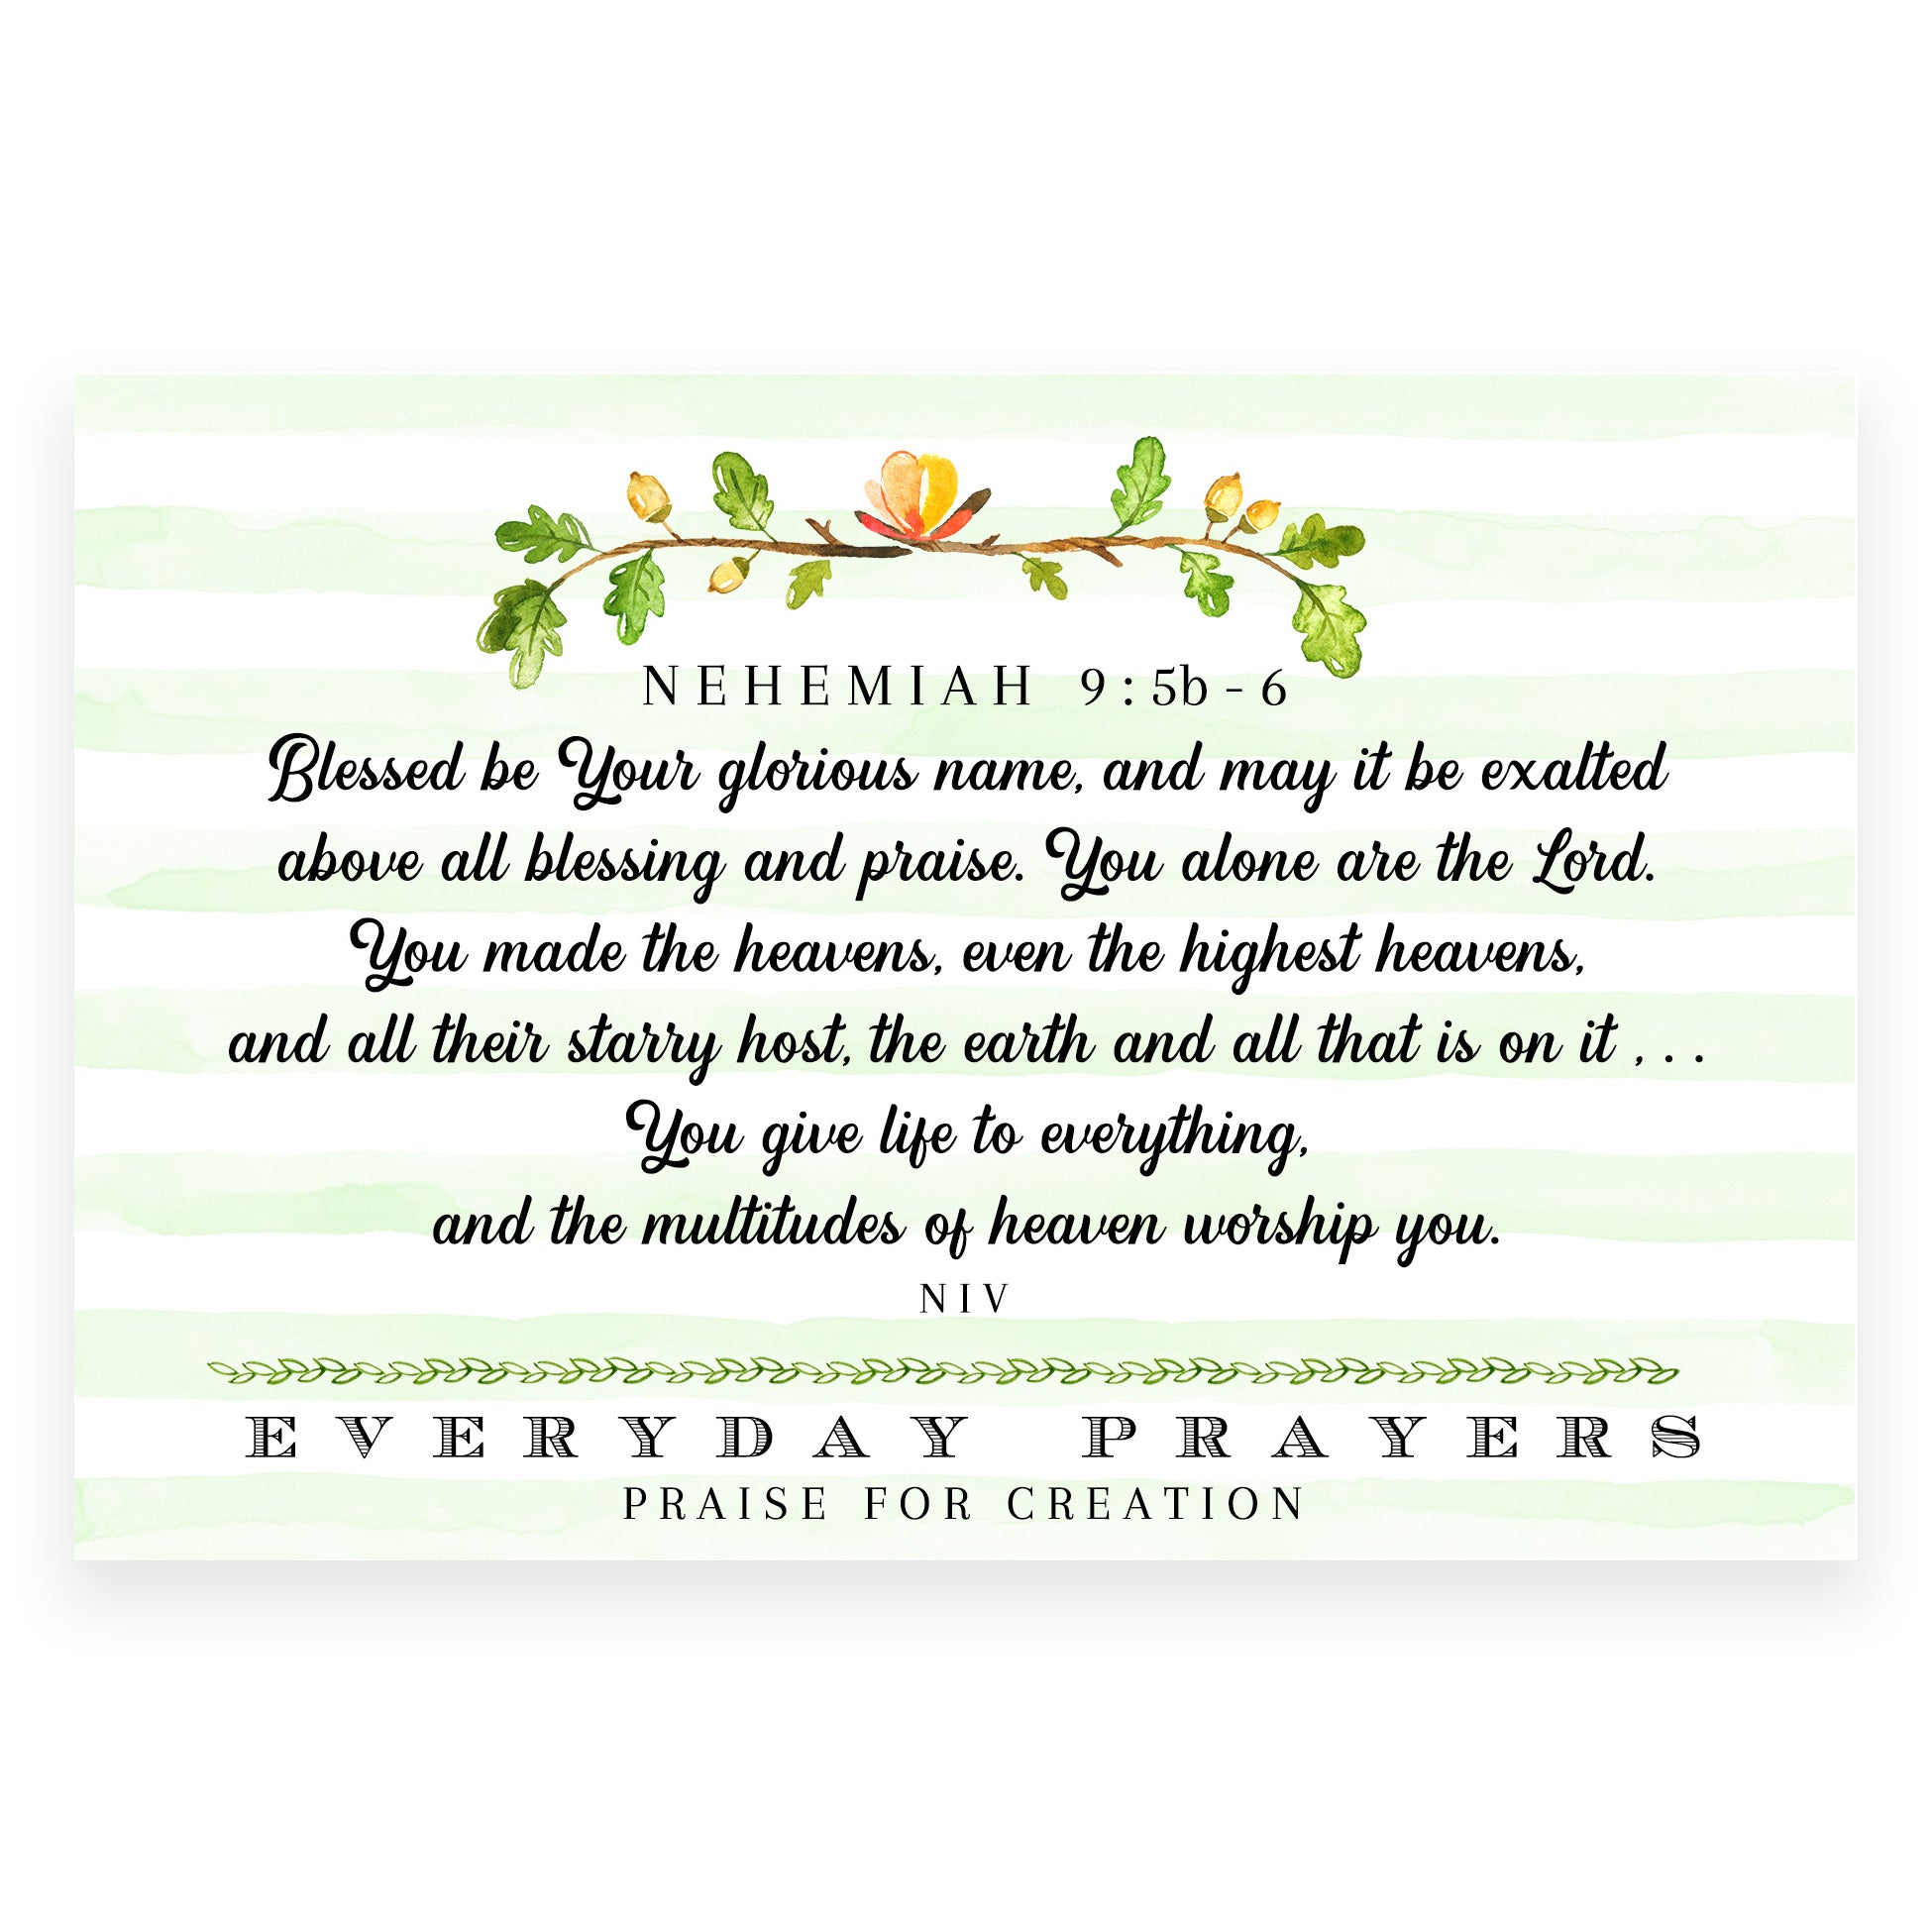 Blessed Be Your Name (Nehemiah 9:5b-6) - Everyday Prayer Card